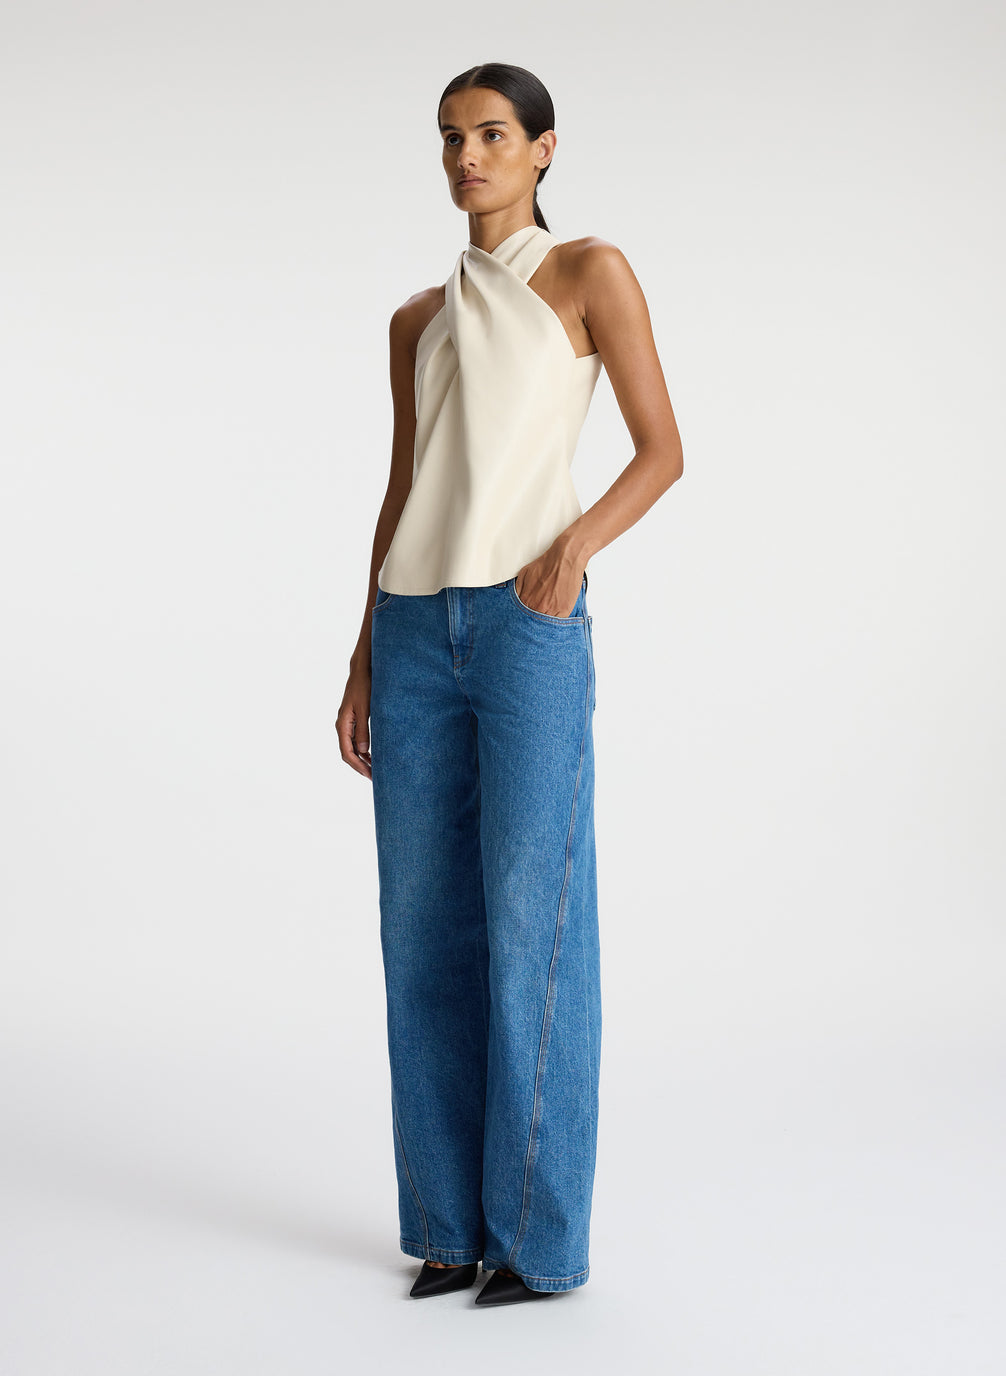 side view of woman wearing cream vegan leather halter top and medium blue wash denim jeans